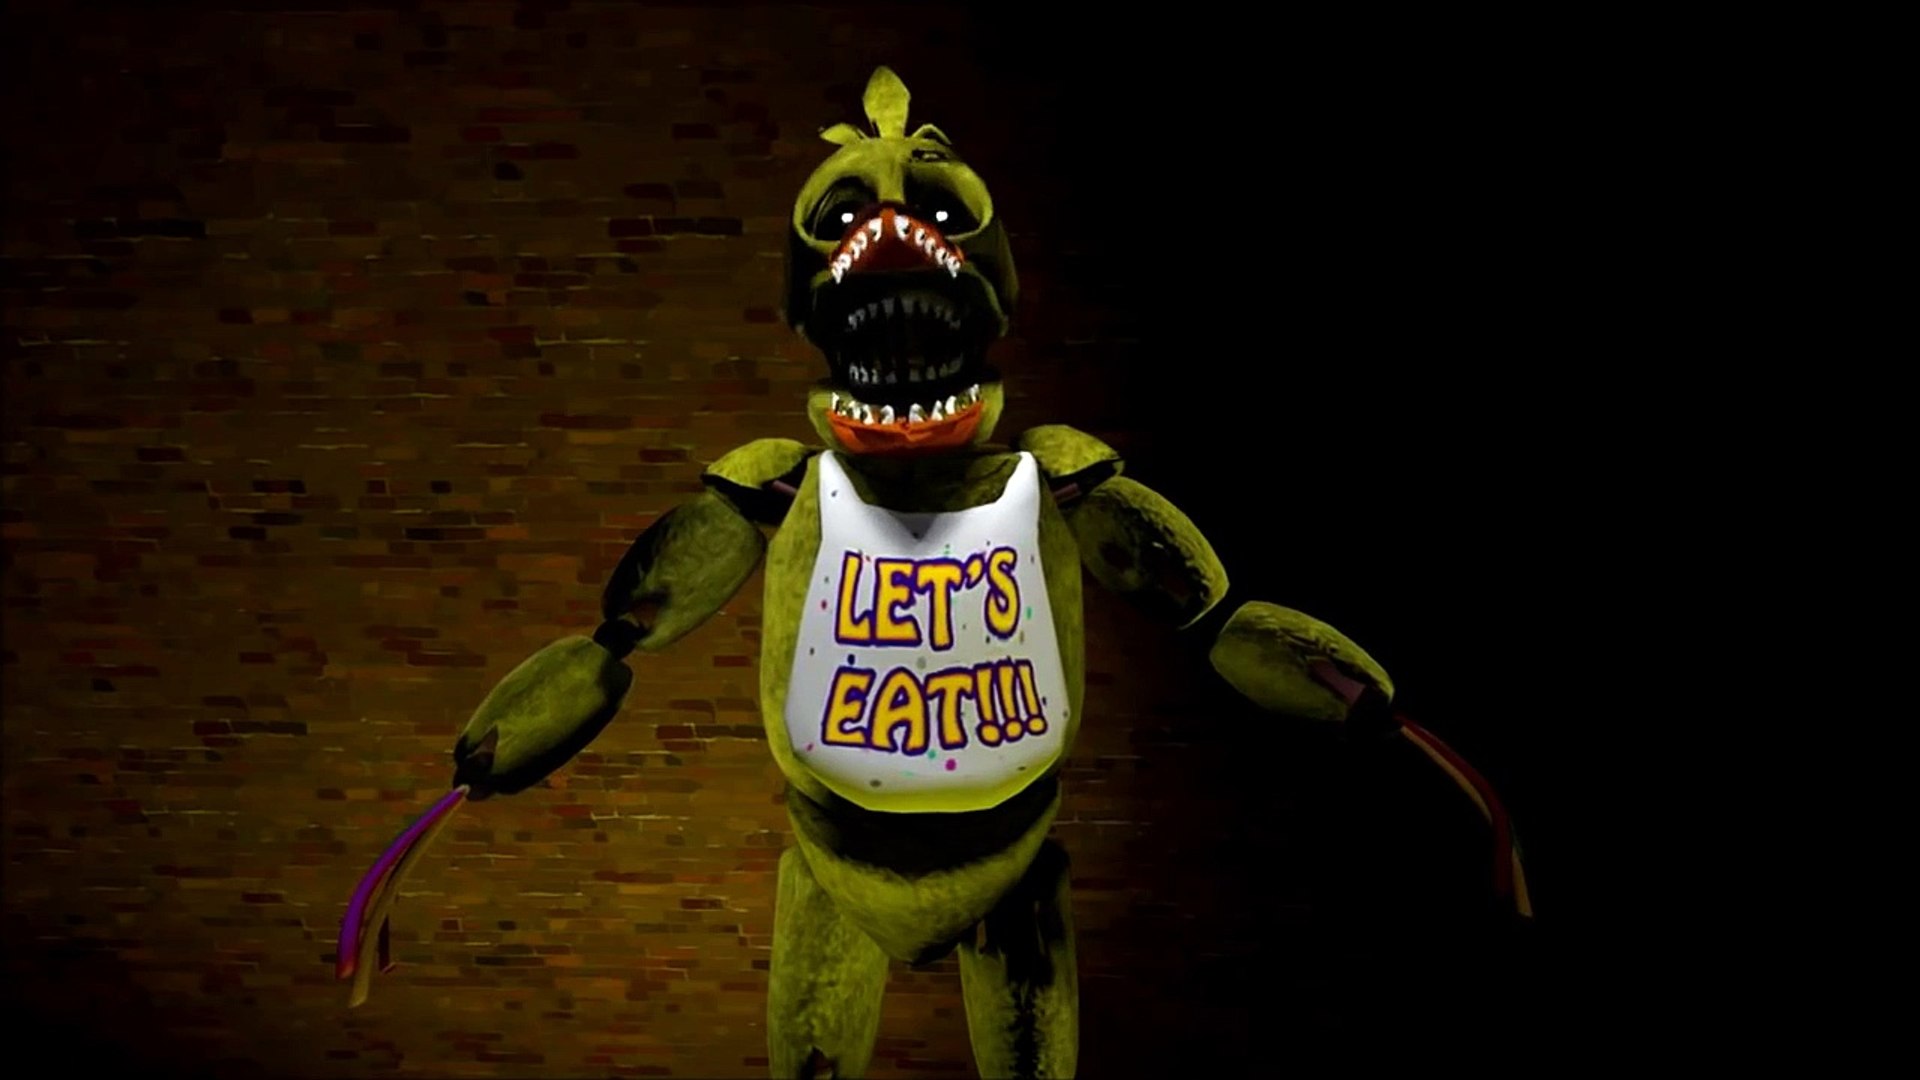 FNAF SFM] David Nears Withered Chica voice (animated) - Dailymotion Video